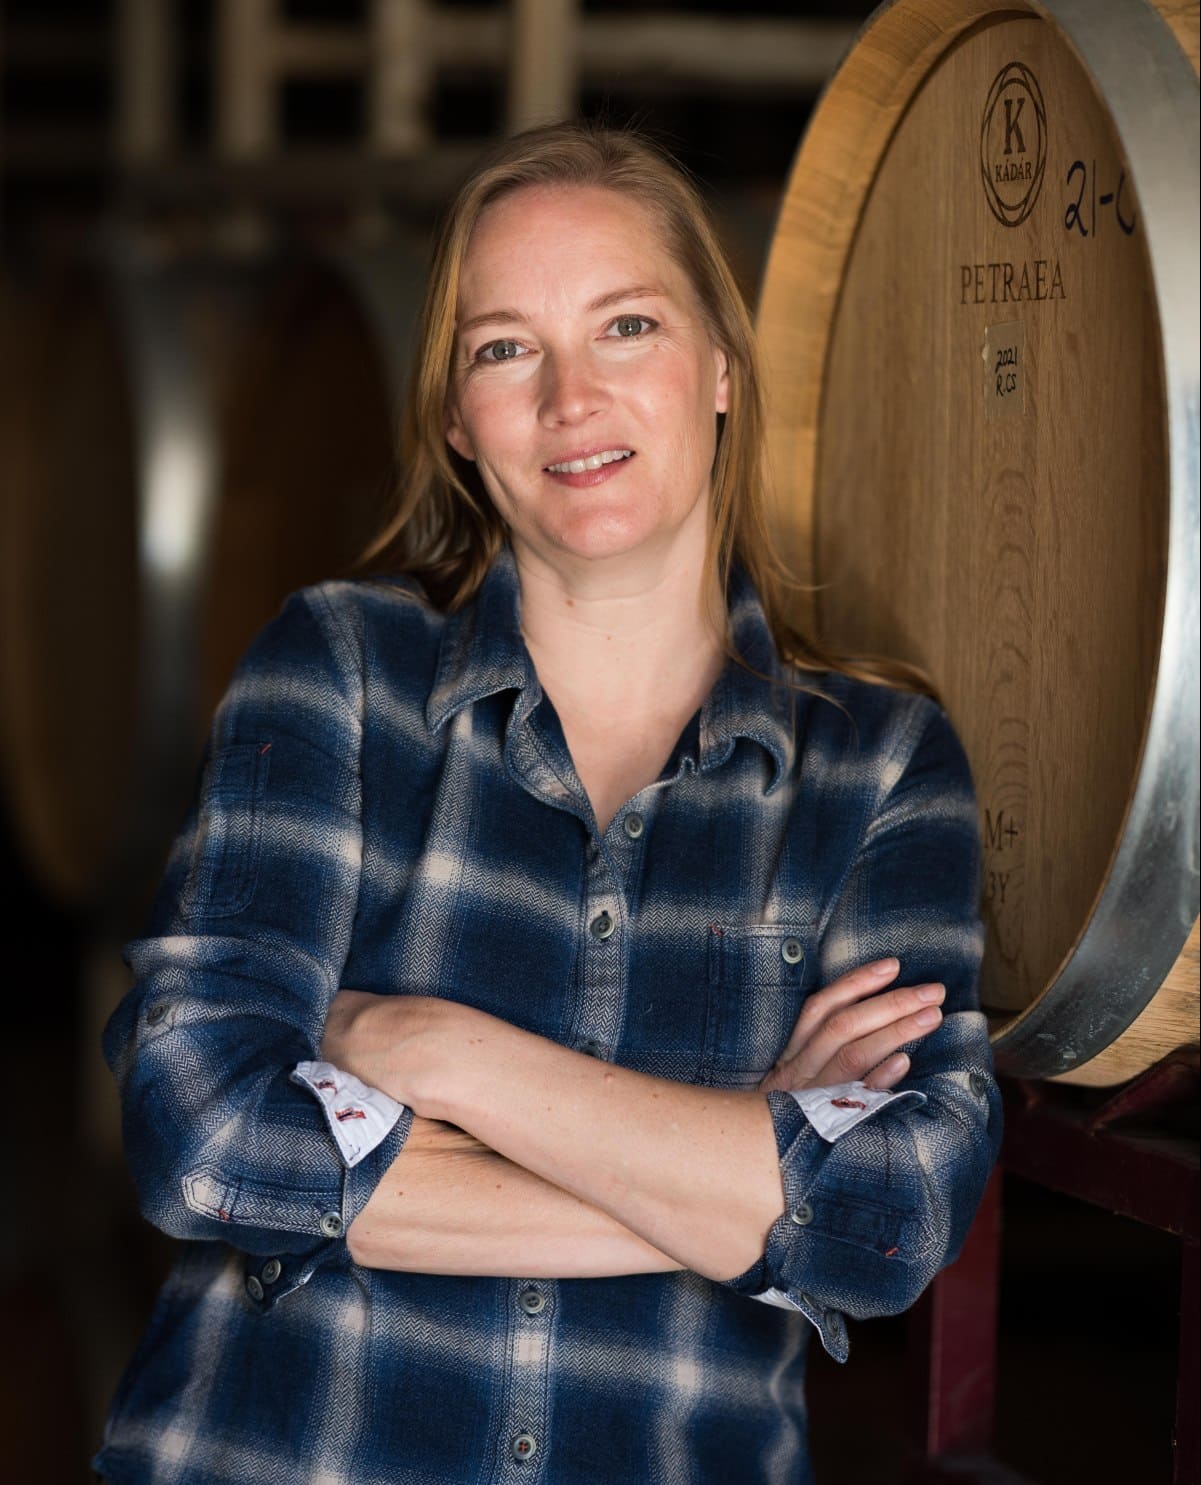 RM winemaker Meredith Sarboraria is wearing a blue plaid shirt and smiling next to a barrel in the cellar